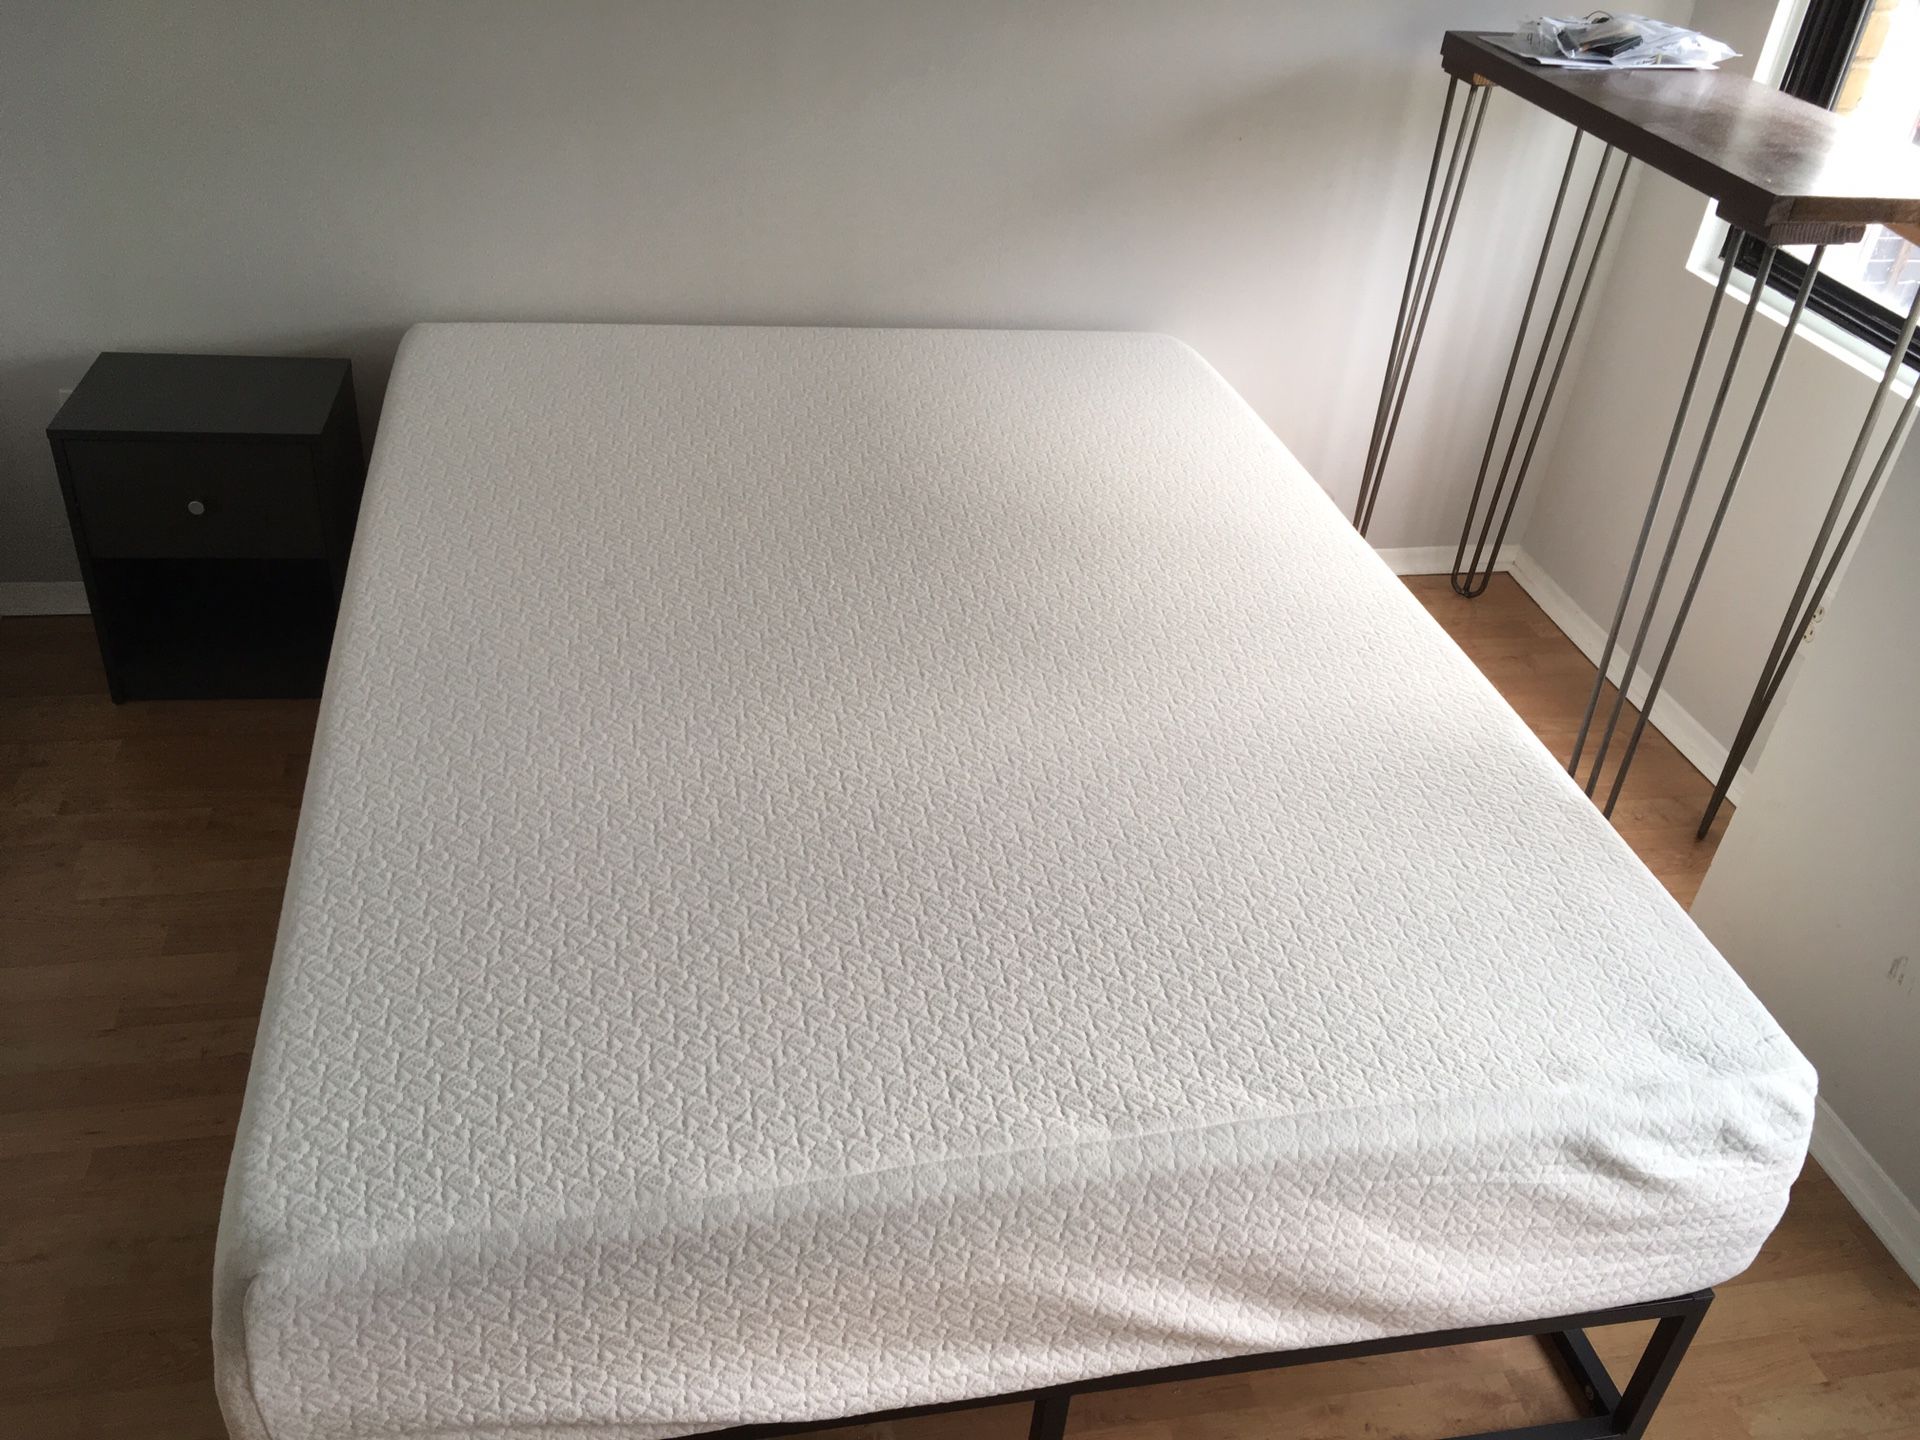 Memory Foam Mattress - Full (7 months old; rarely used)